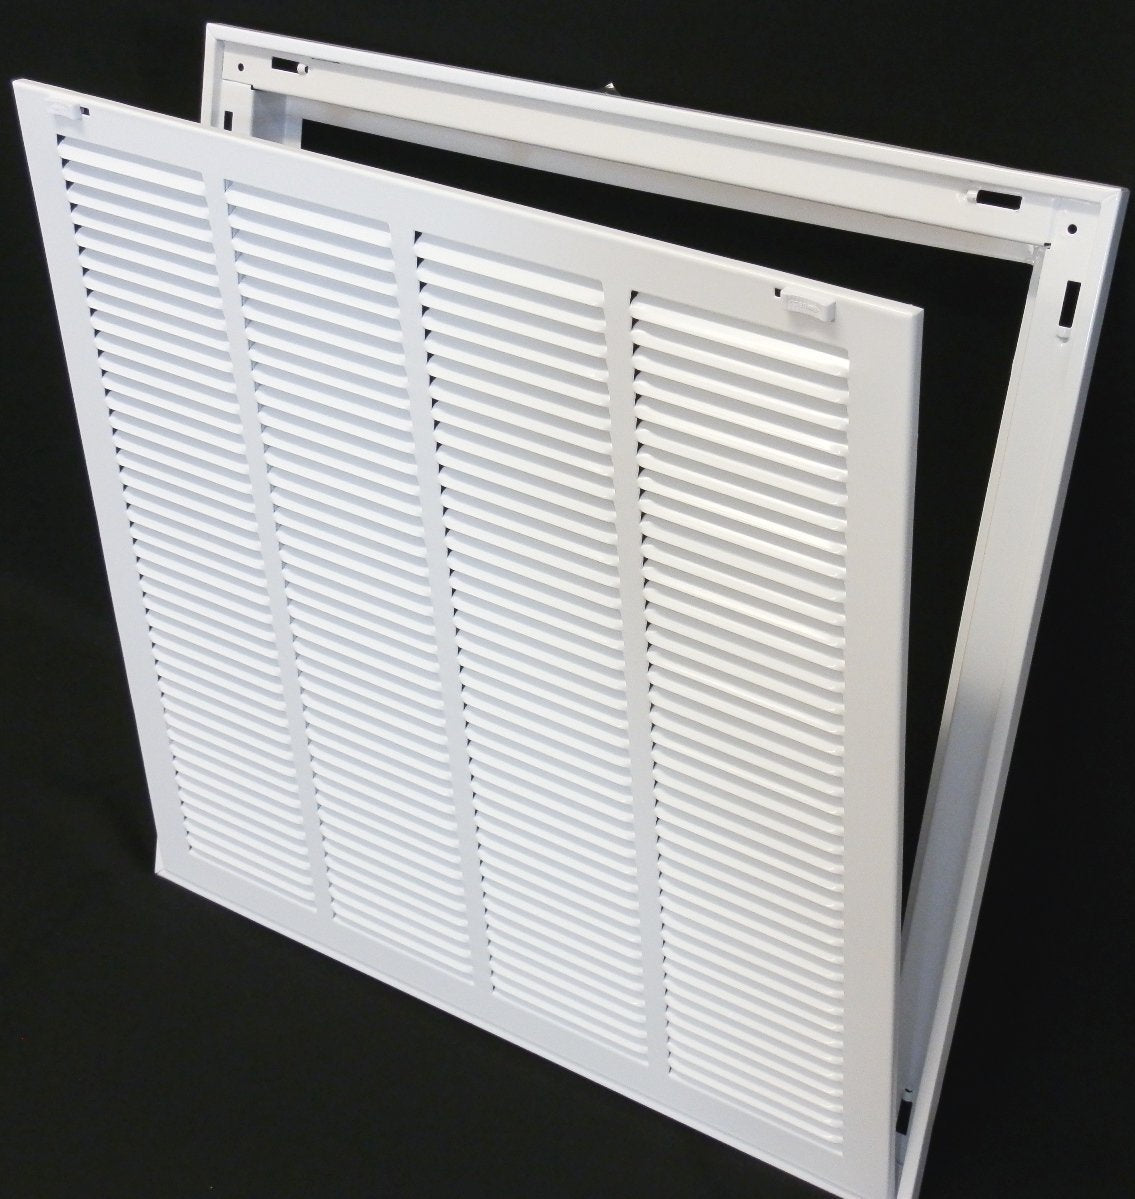 30&quot; X 26&quot; Steel Return Air Filter Grille for 1&quot; Filter - Removable Frame - [Outer Dimensions: 32 5/8&quot; X 28 5/8&quot;]